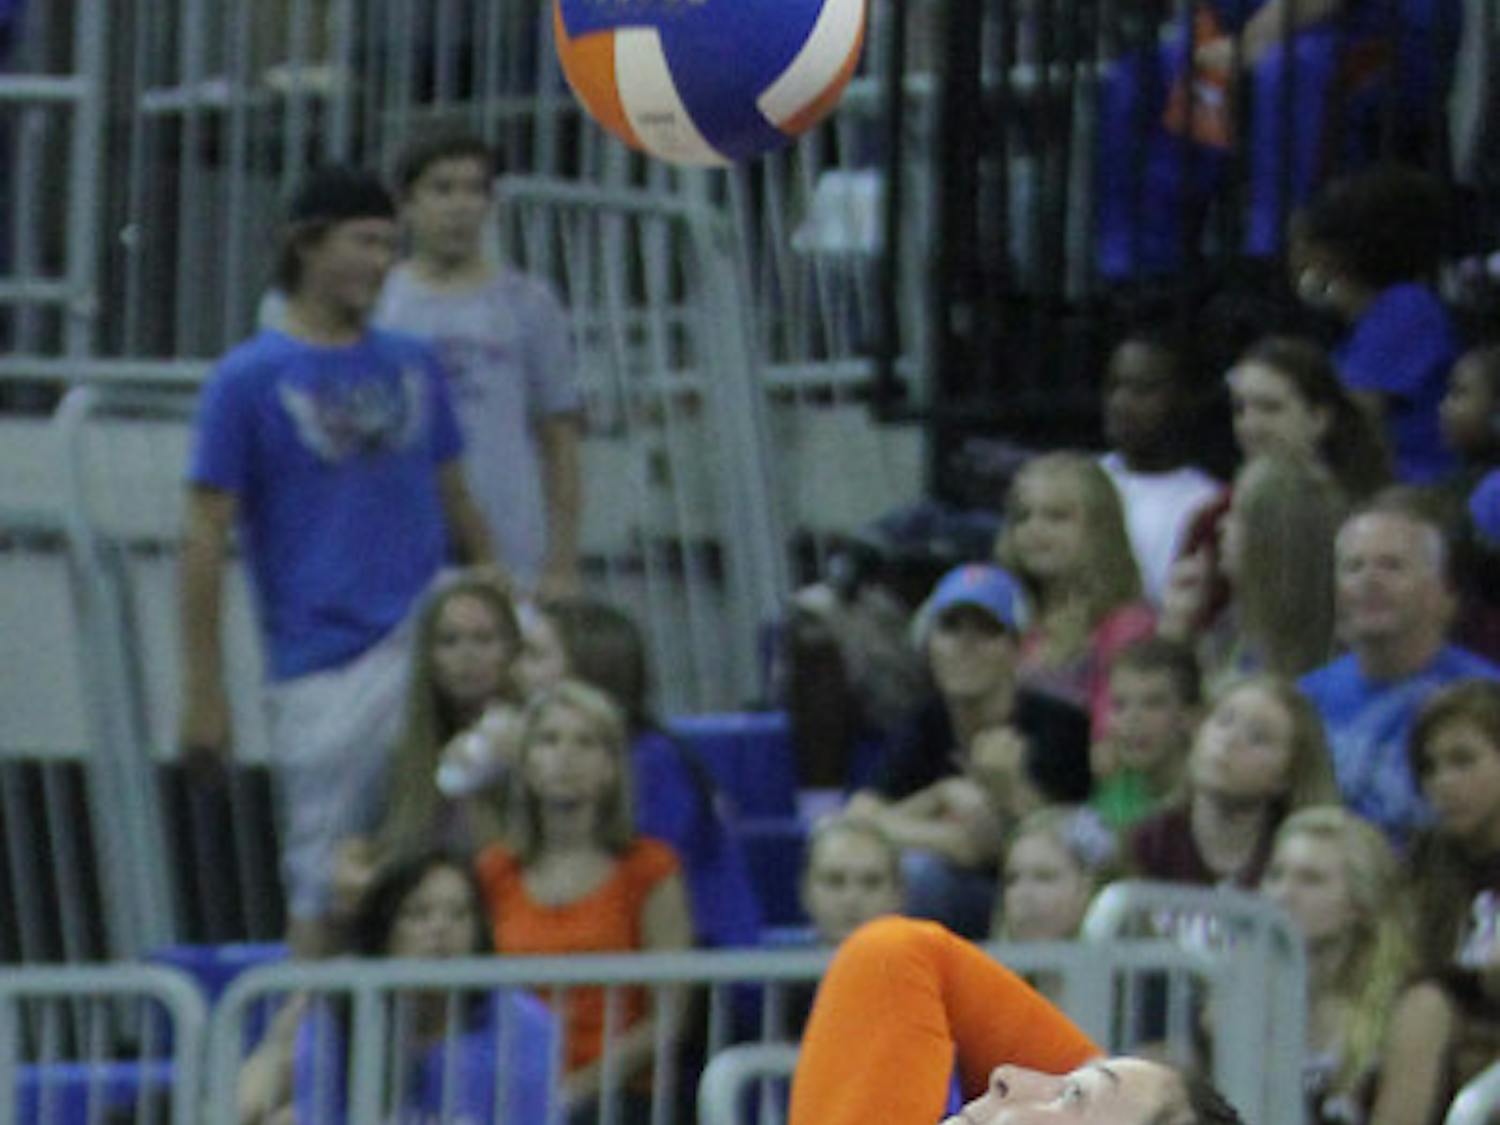 Florida libero Taylor Unroe (5) serves during Florida’s 3-0 win against Missouri on Sept. 21 in the Stephen C. O’Connell Center. Unroe's 18 digs against Alabama on Friday her second-highest total in a three-set match.
 